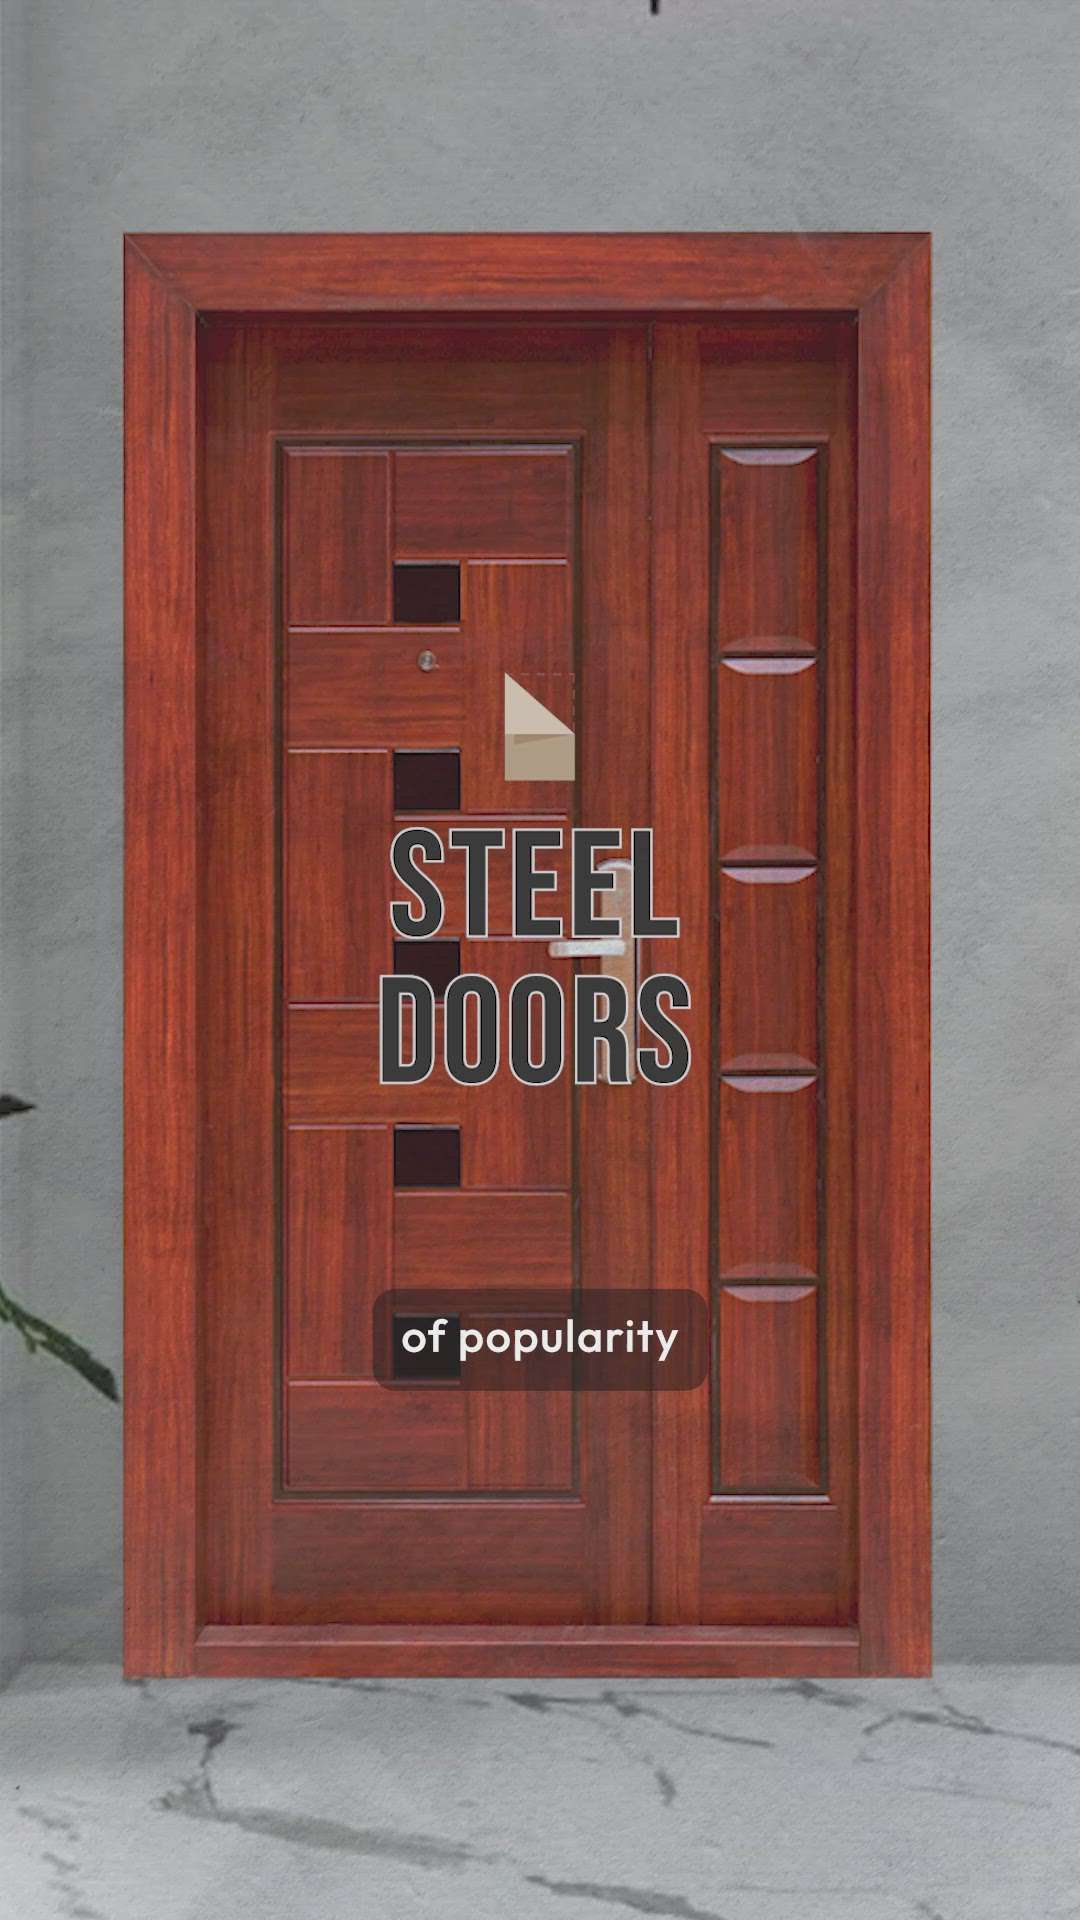 Steel doors are gaining popularity among homeowners. They're not only budget-friendly but also offer various advantages such as durability and customization options. 

Check out I-Leaf for their steel door products and much more : https://koloapp.in/call/049-542-62993

#creatorsofkolo #kerala #ileaf #steeldoors #interior #architect #home